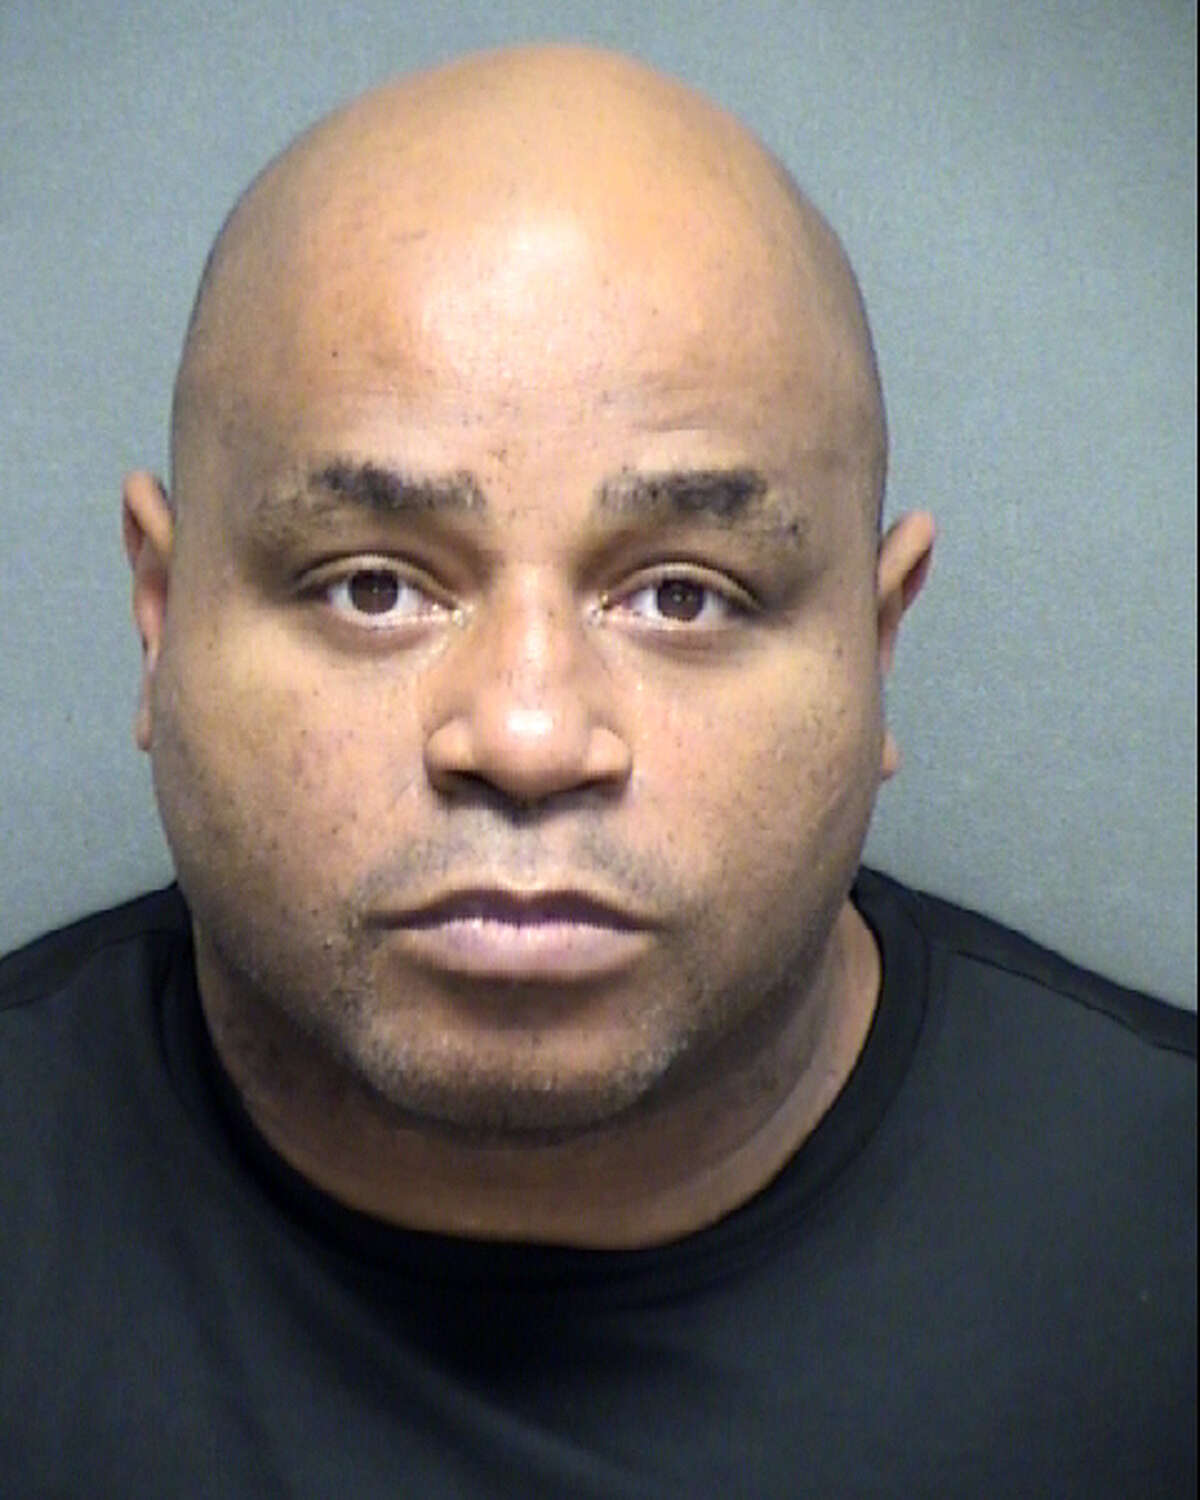 Bexar County Sheriff's Deputy Sherman Andrews, 48, was arrested Tuesday night in connection with evidence tampering.